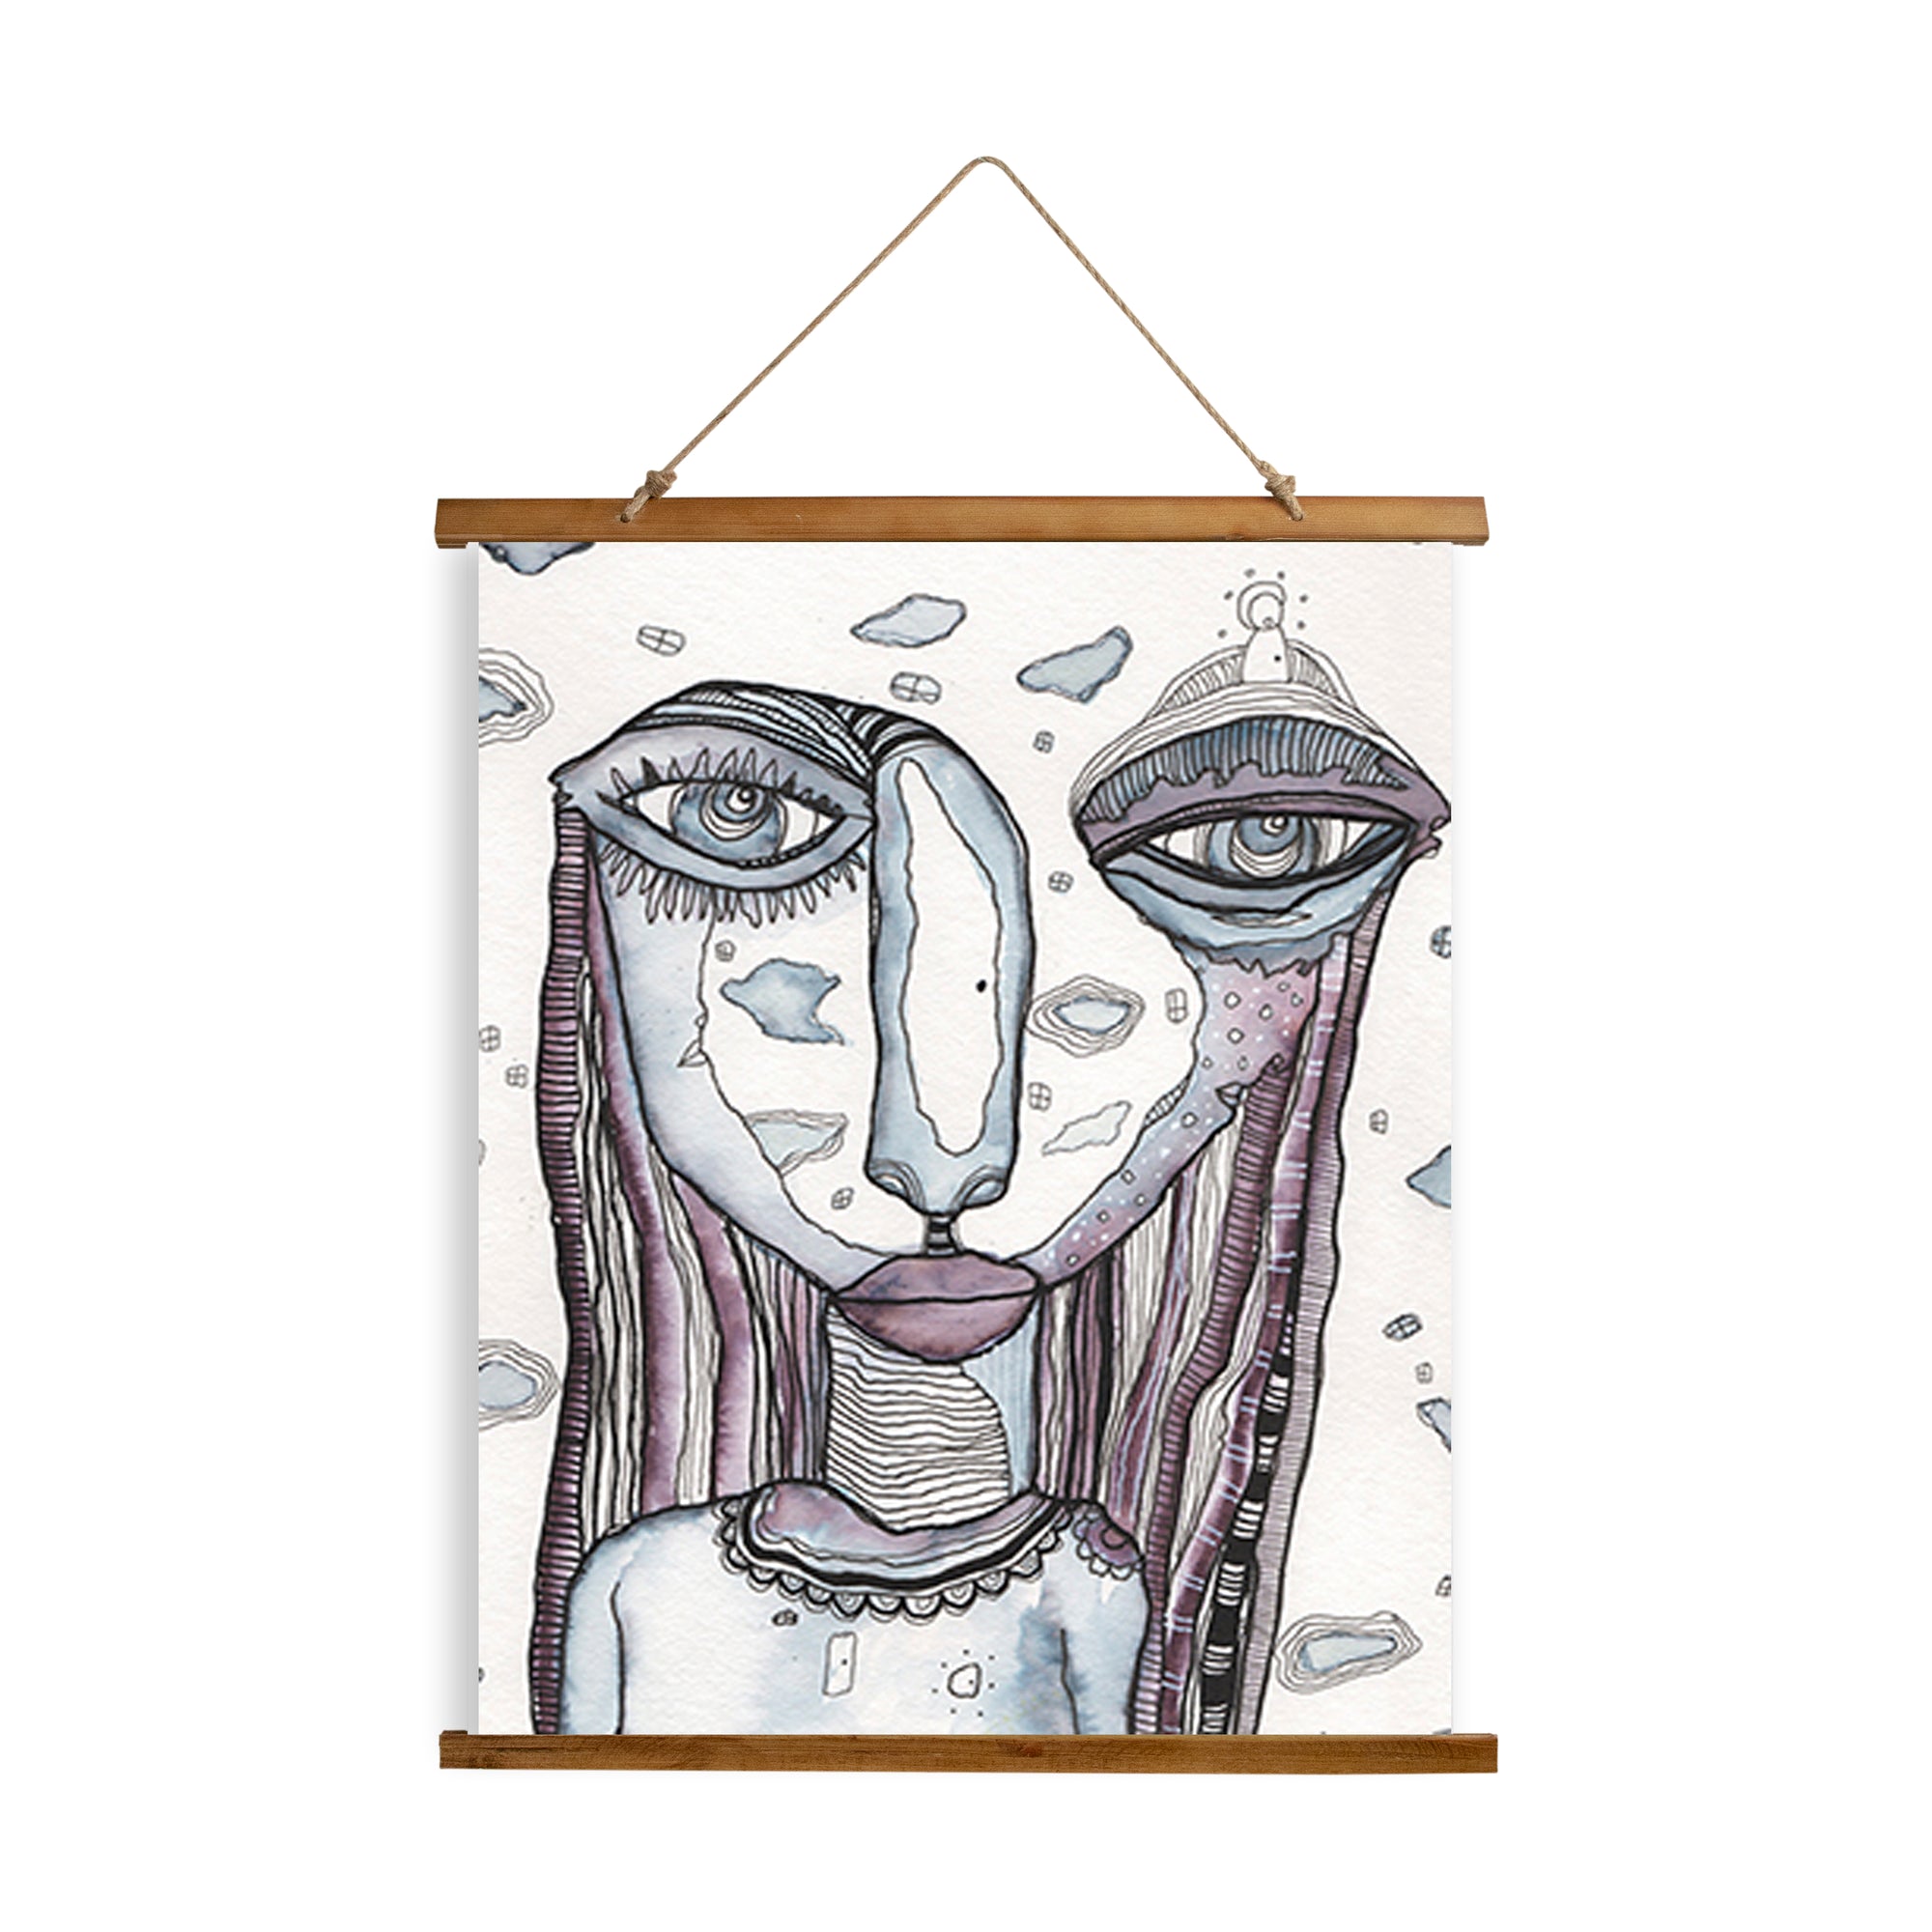 Whimsical Wood Slat Tapestry "In Her Dreams"